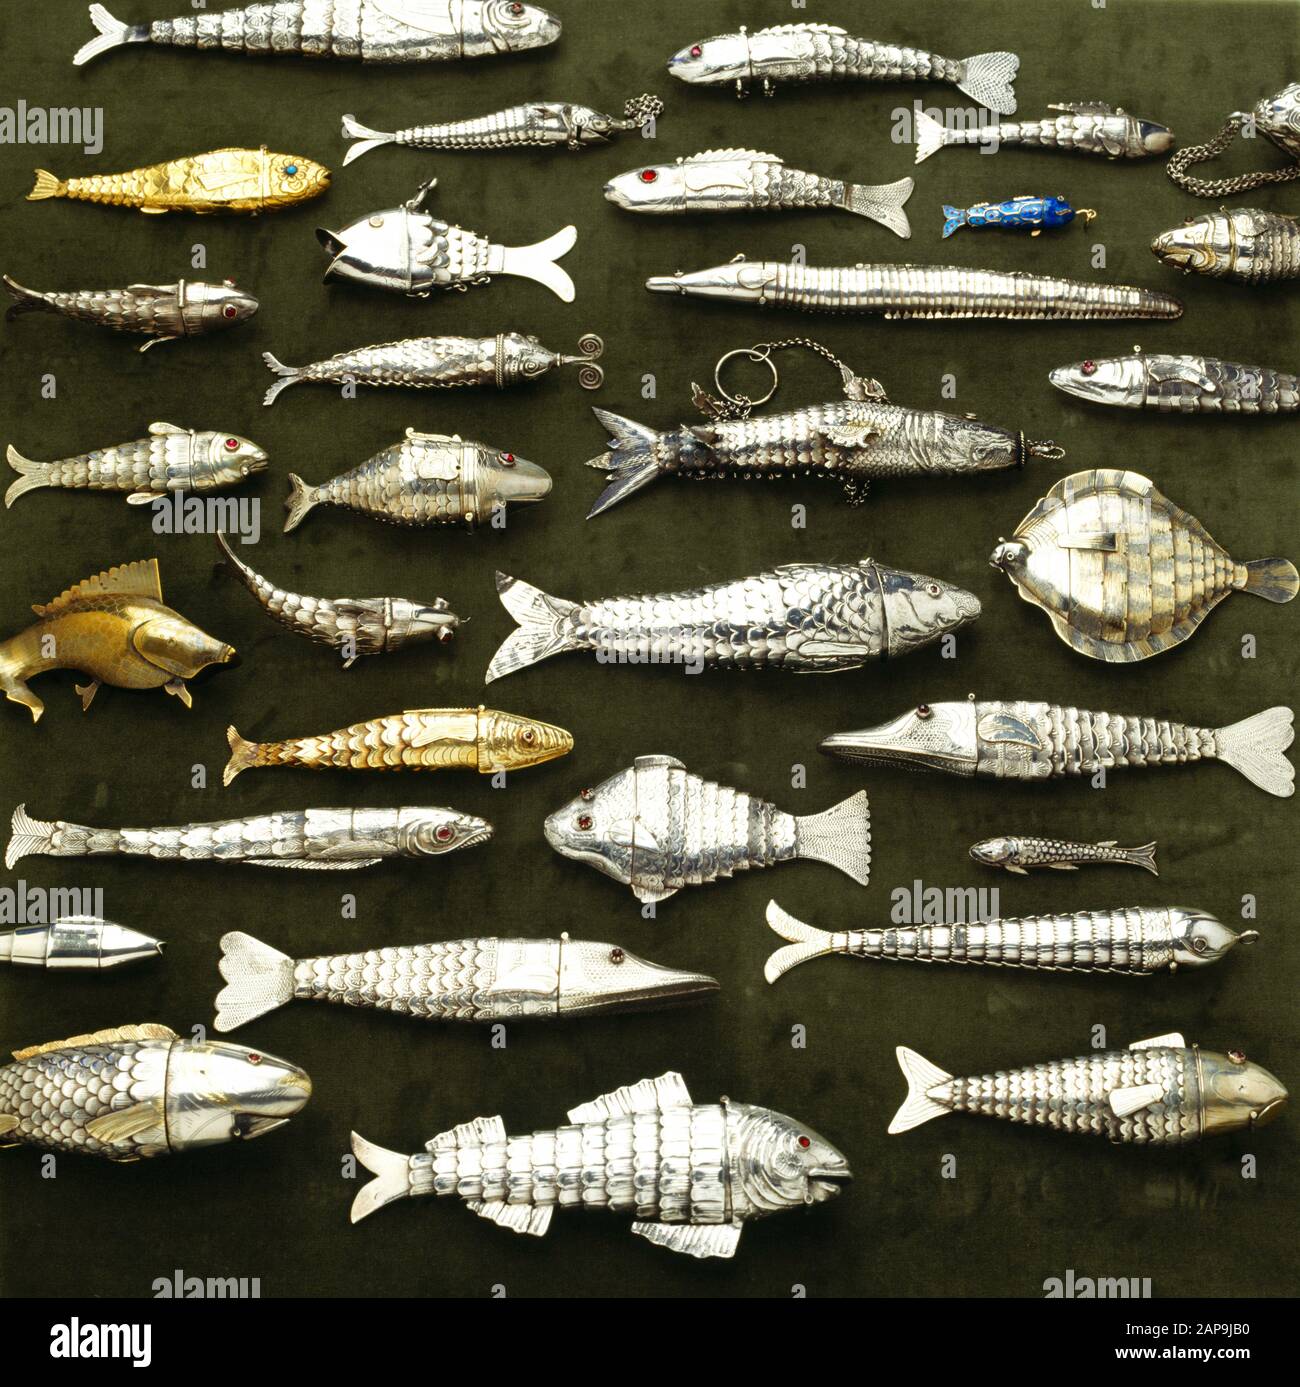 https://c8.alamy.com/comp/2AP9JB0/detail-of-3rd-marchioness-of-bristols-collection-of-silver-fish-used-as-scent-containers-vinaigrettes-and-for-ornament-in-the-museum-landing-at-ickw-2AP9JB0.jpg